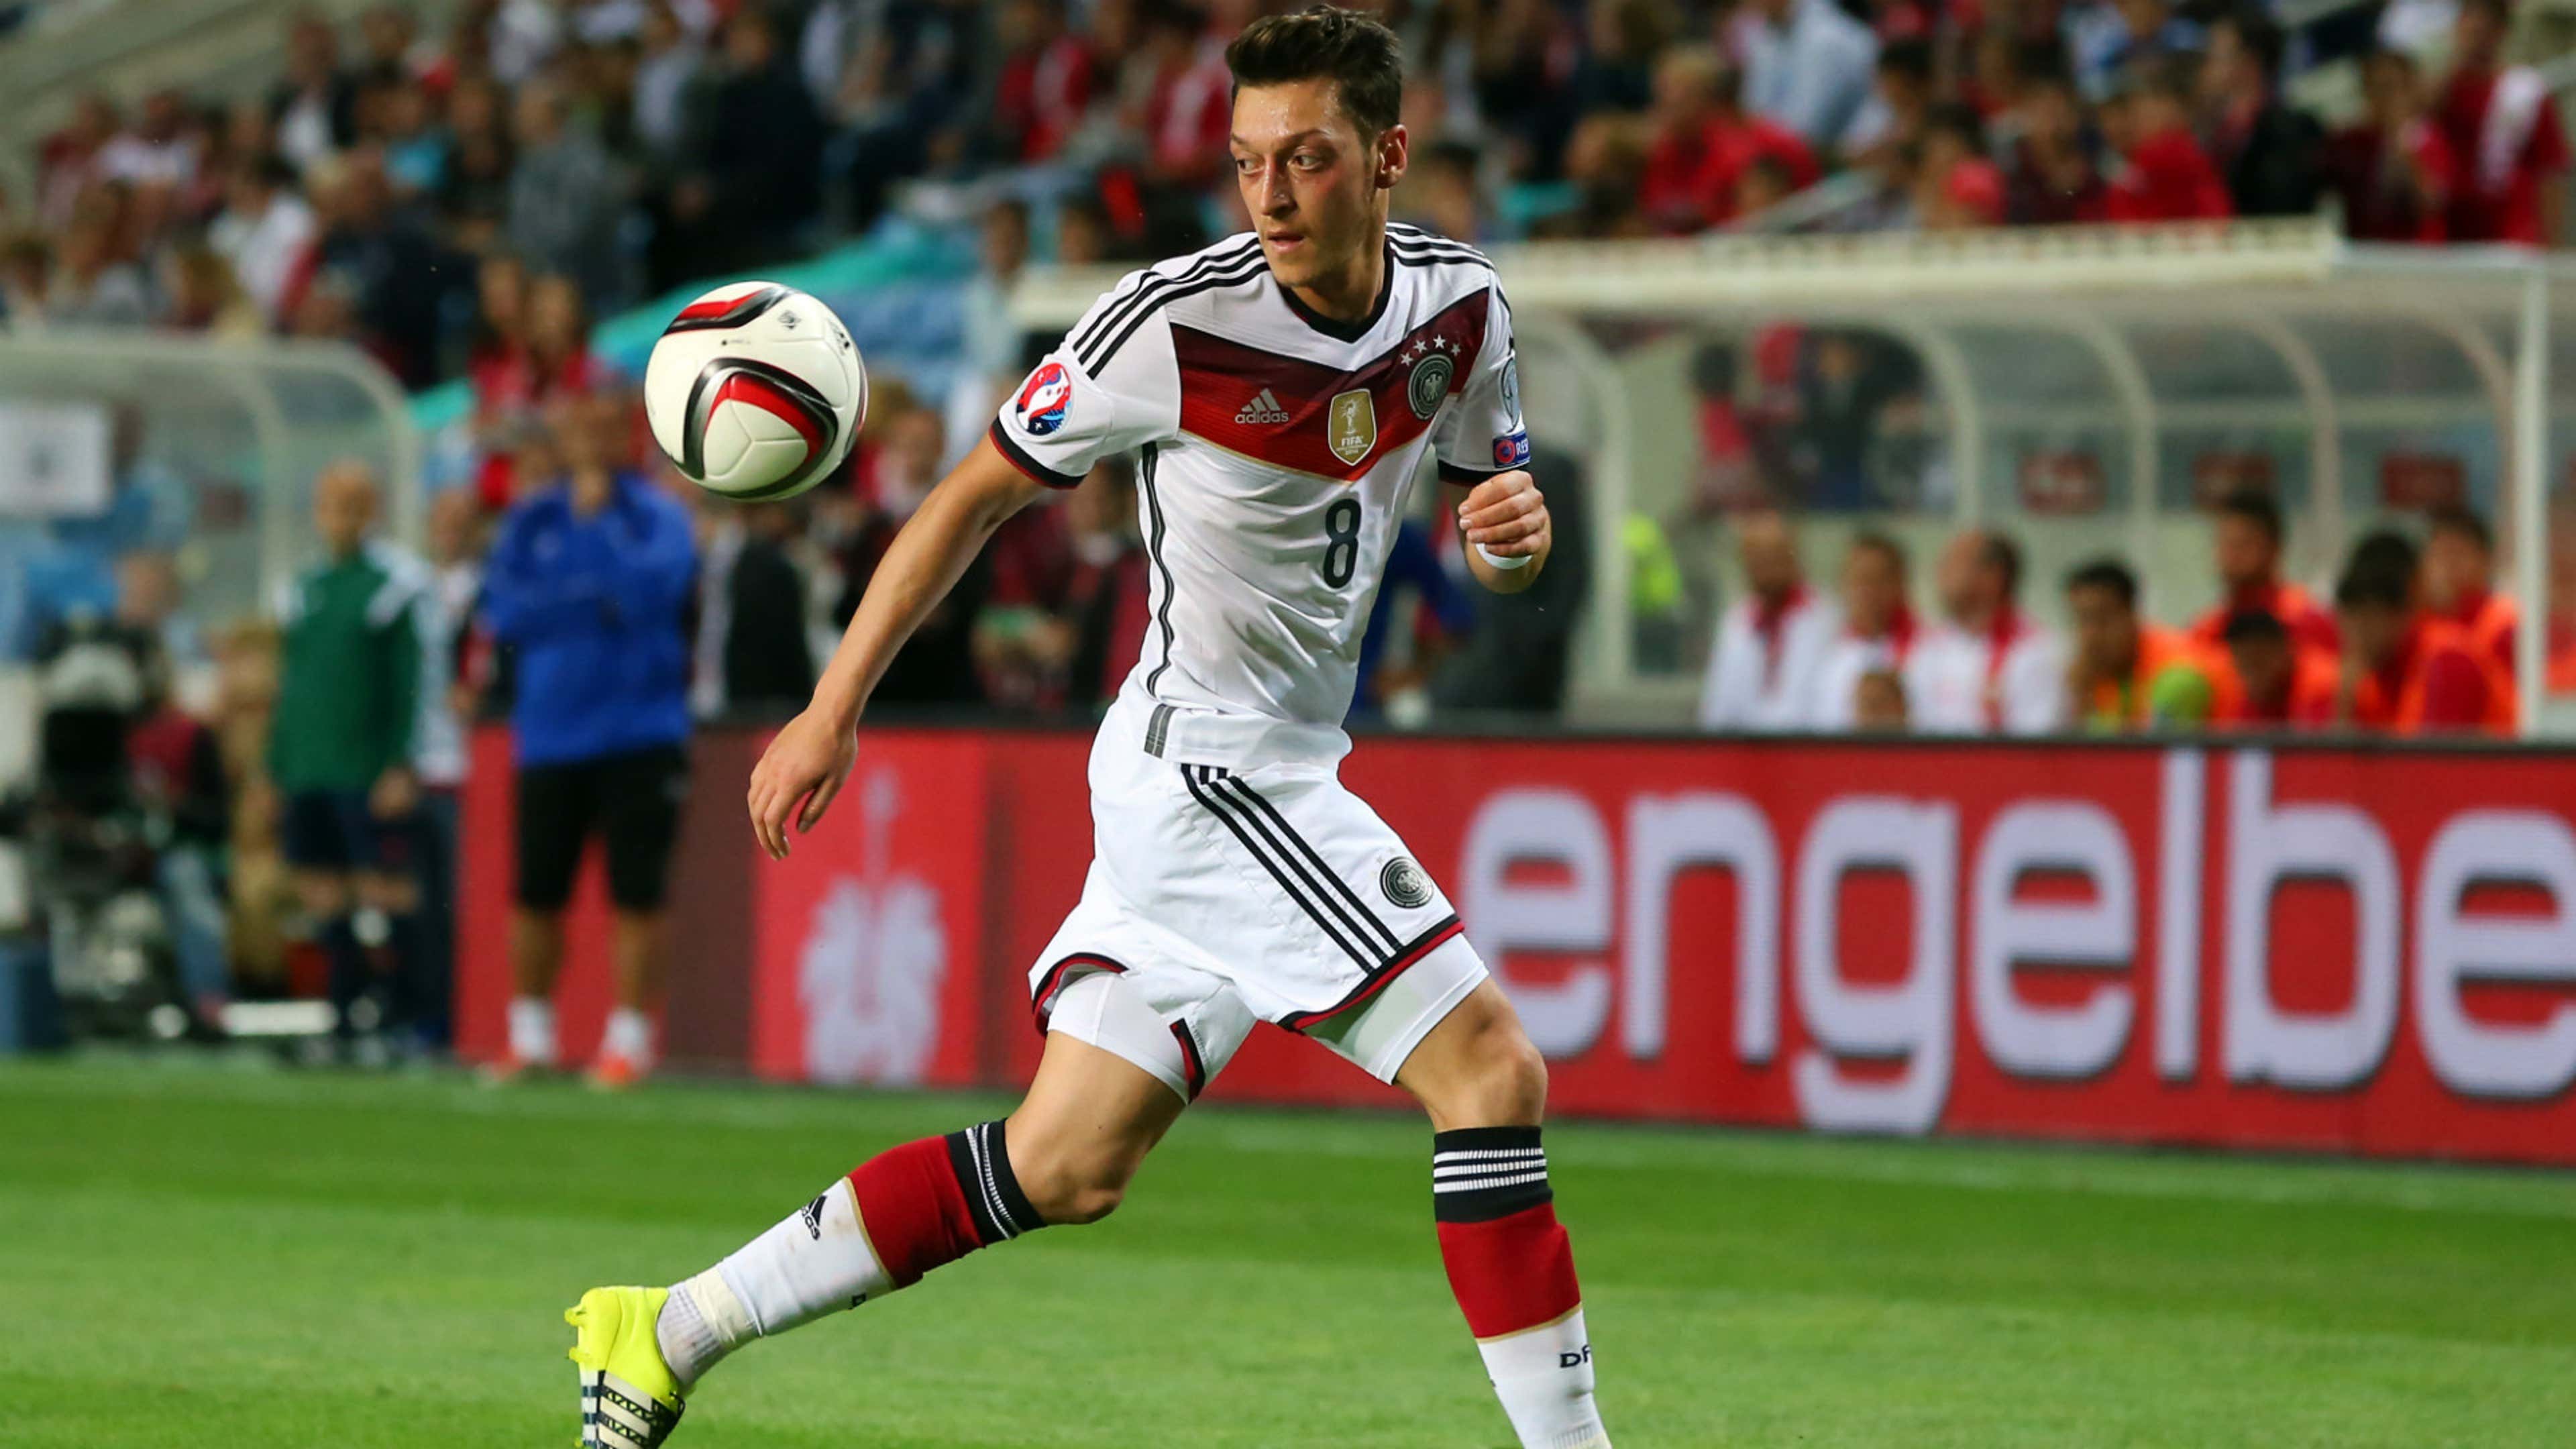 Germany 2014 World Cup squad - Who were German heroes and where are they  now?